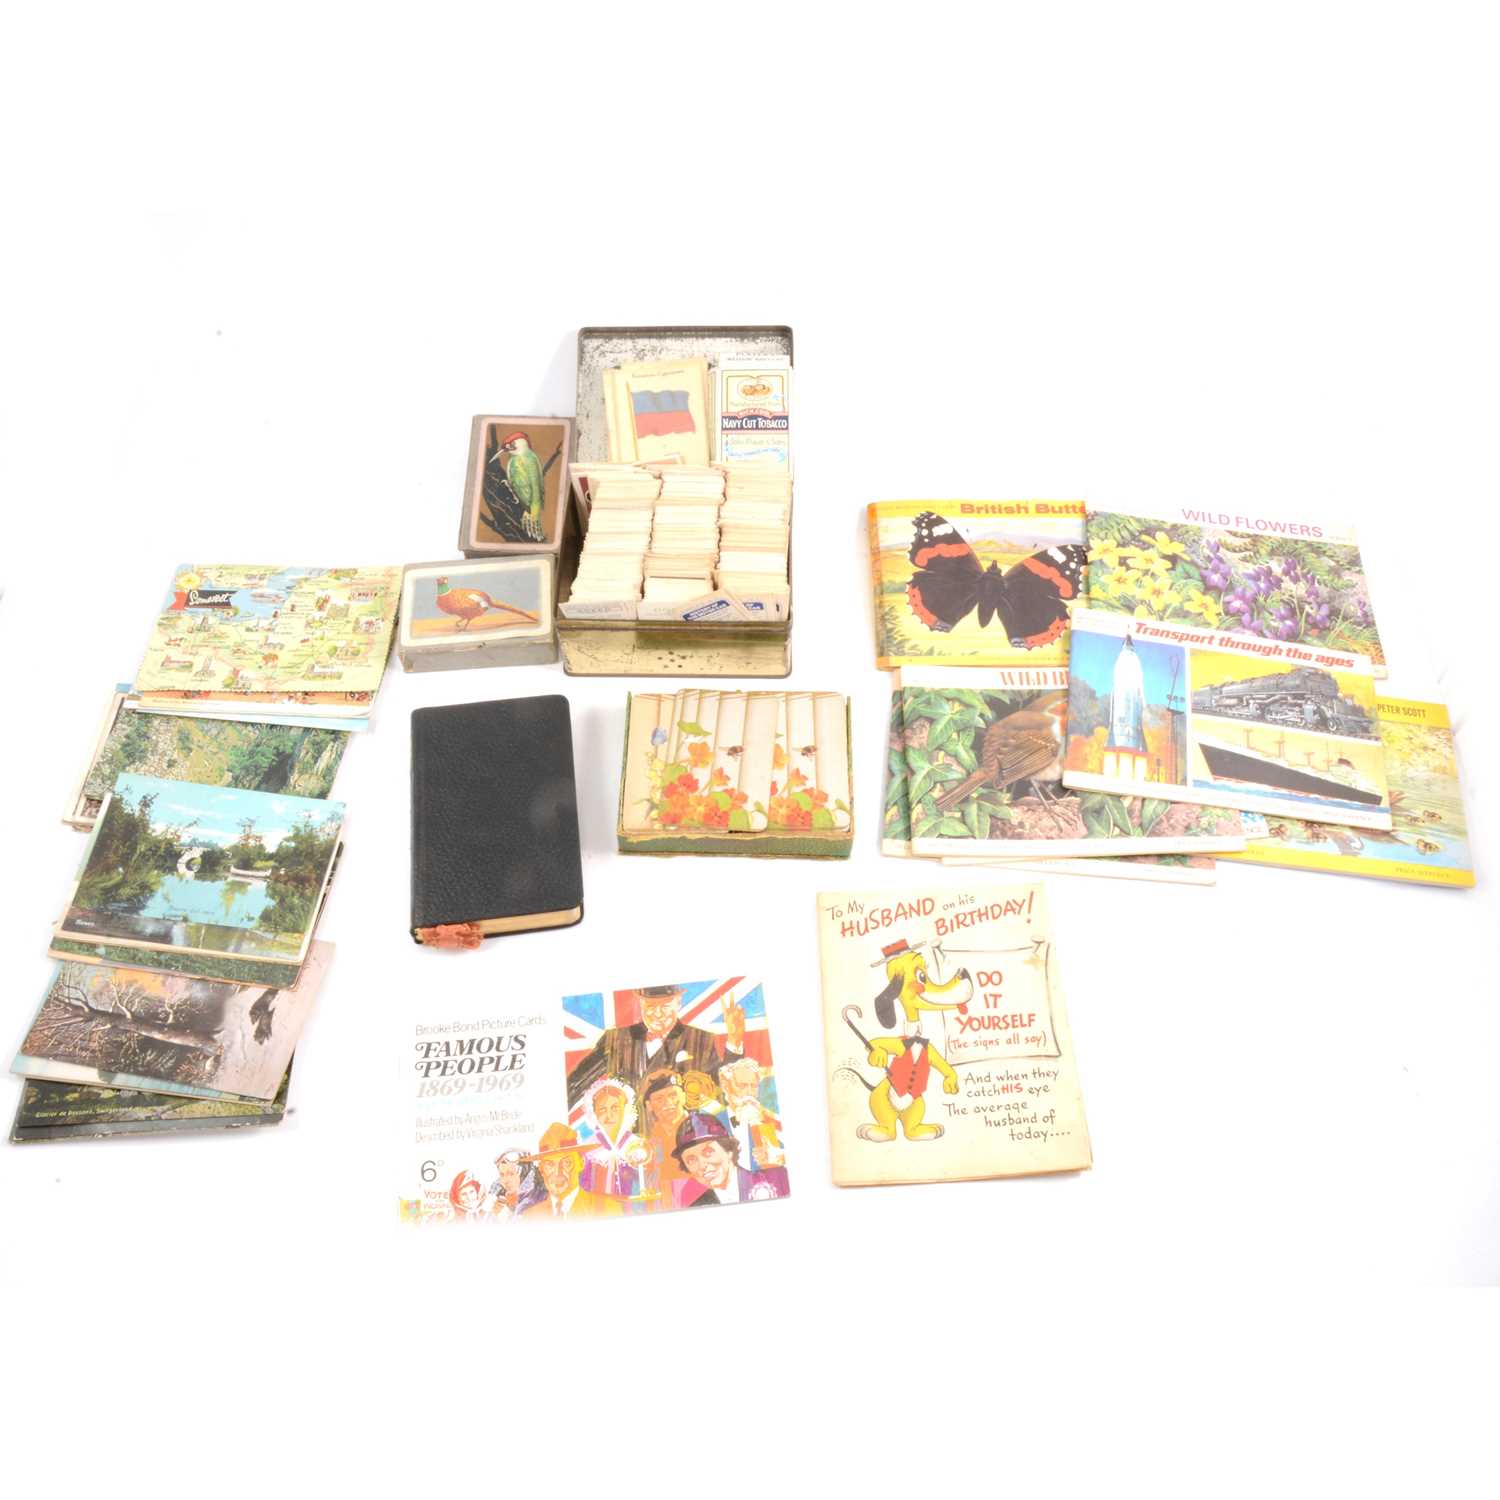 Lot 83 - Postcard album, cigarette and trade cards, playing cards and a bible.